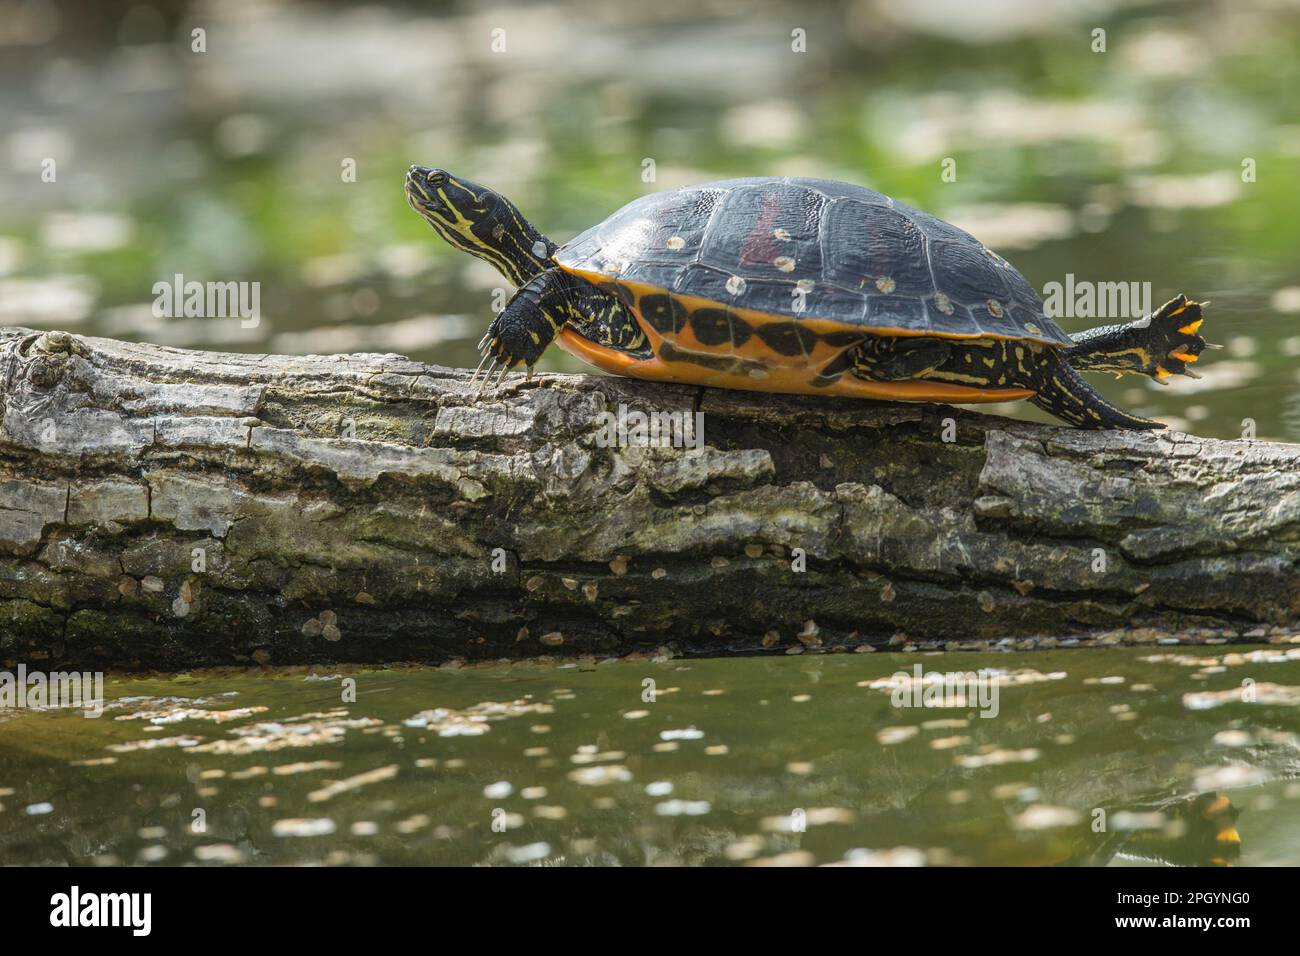 Florida Red-bellied Cooter (Pseudemys nelsoni), sun basking on tree trunk in pond Stock Photo